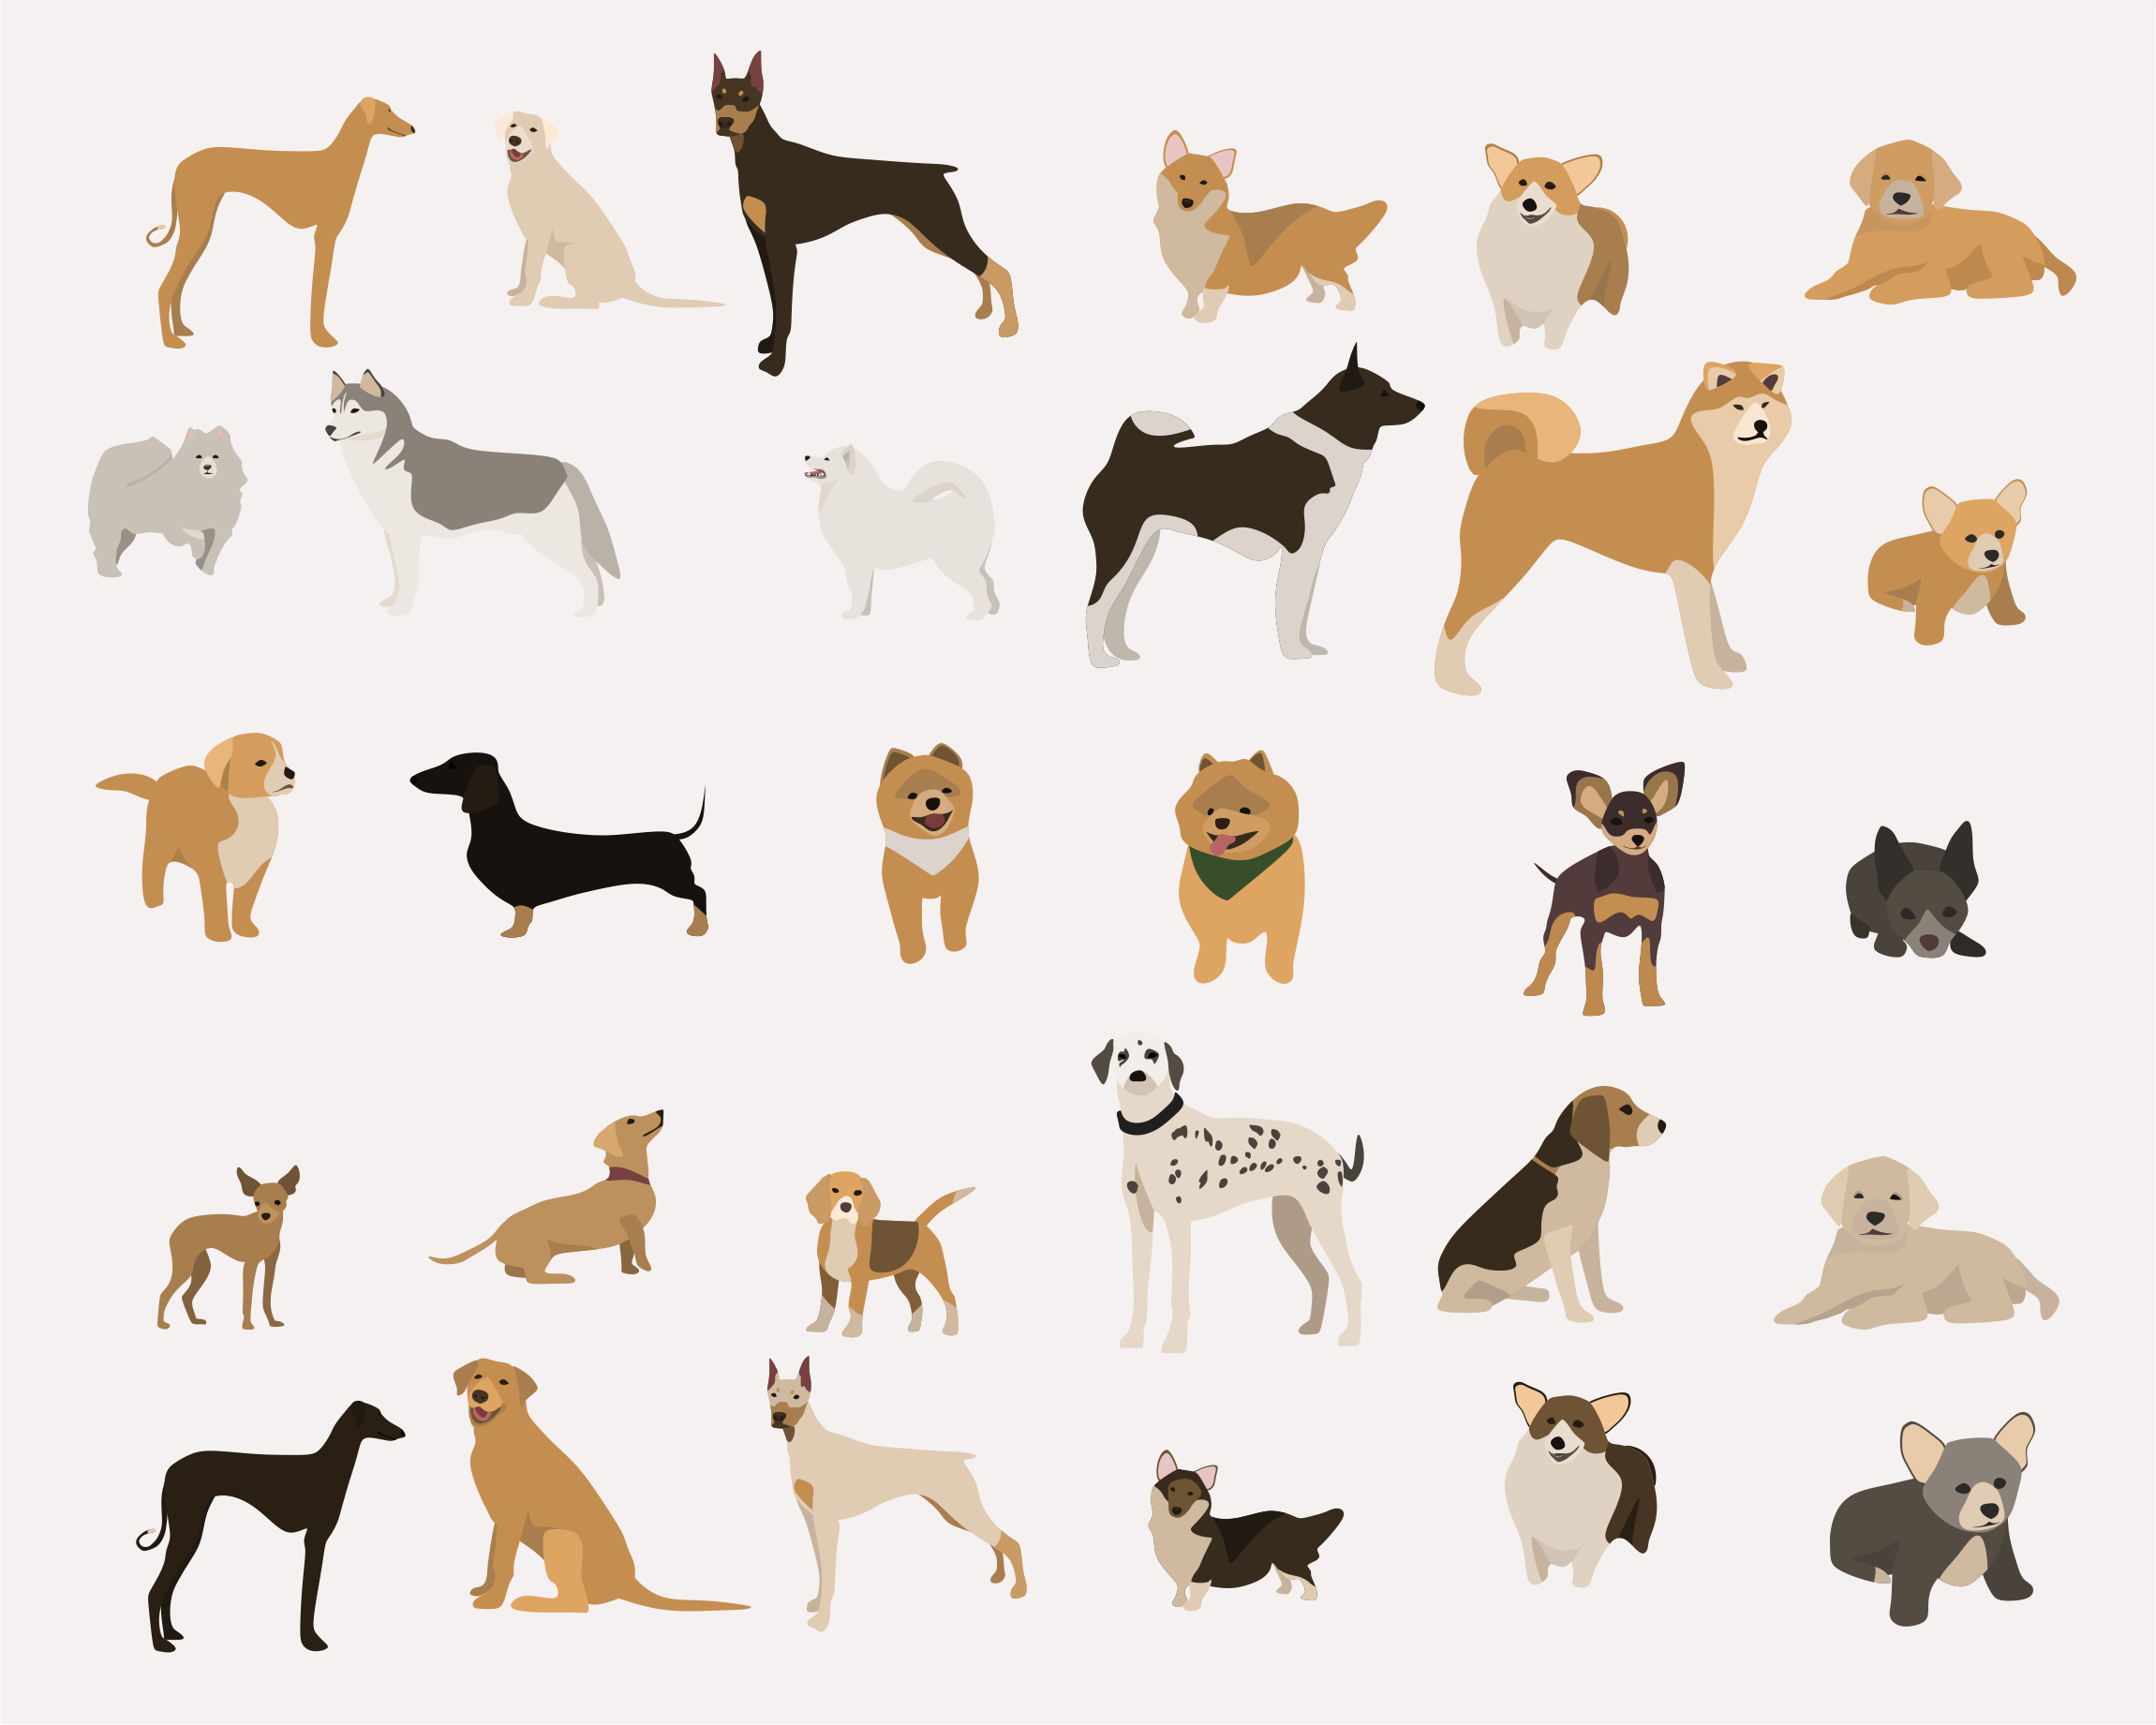 Dog Breeds Clipart Cute Dogs Clip Art Graphic By Inkley Studio ...